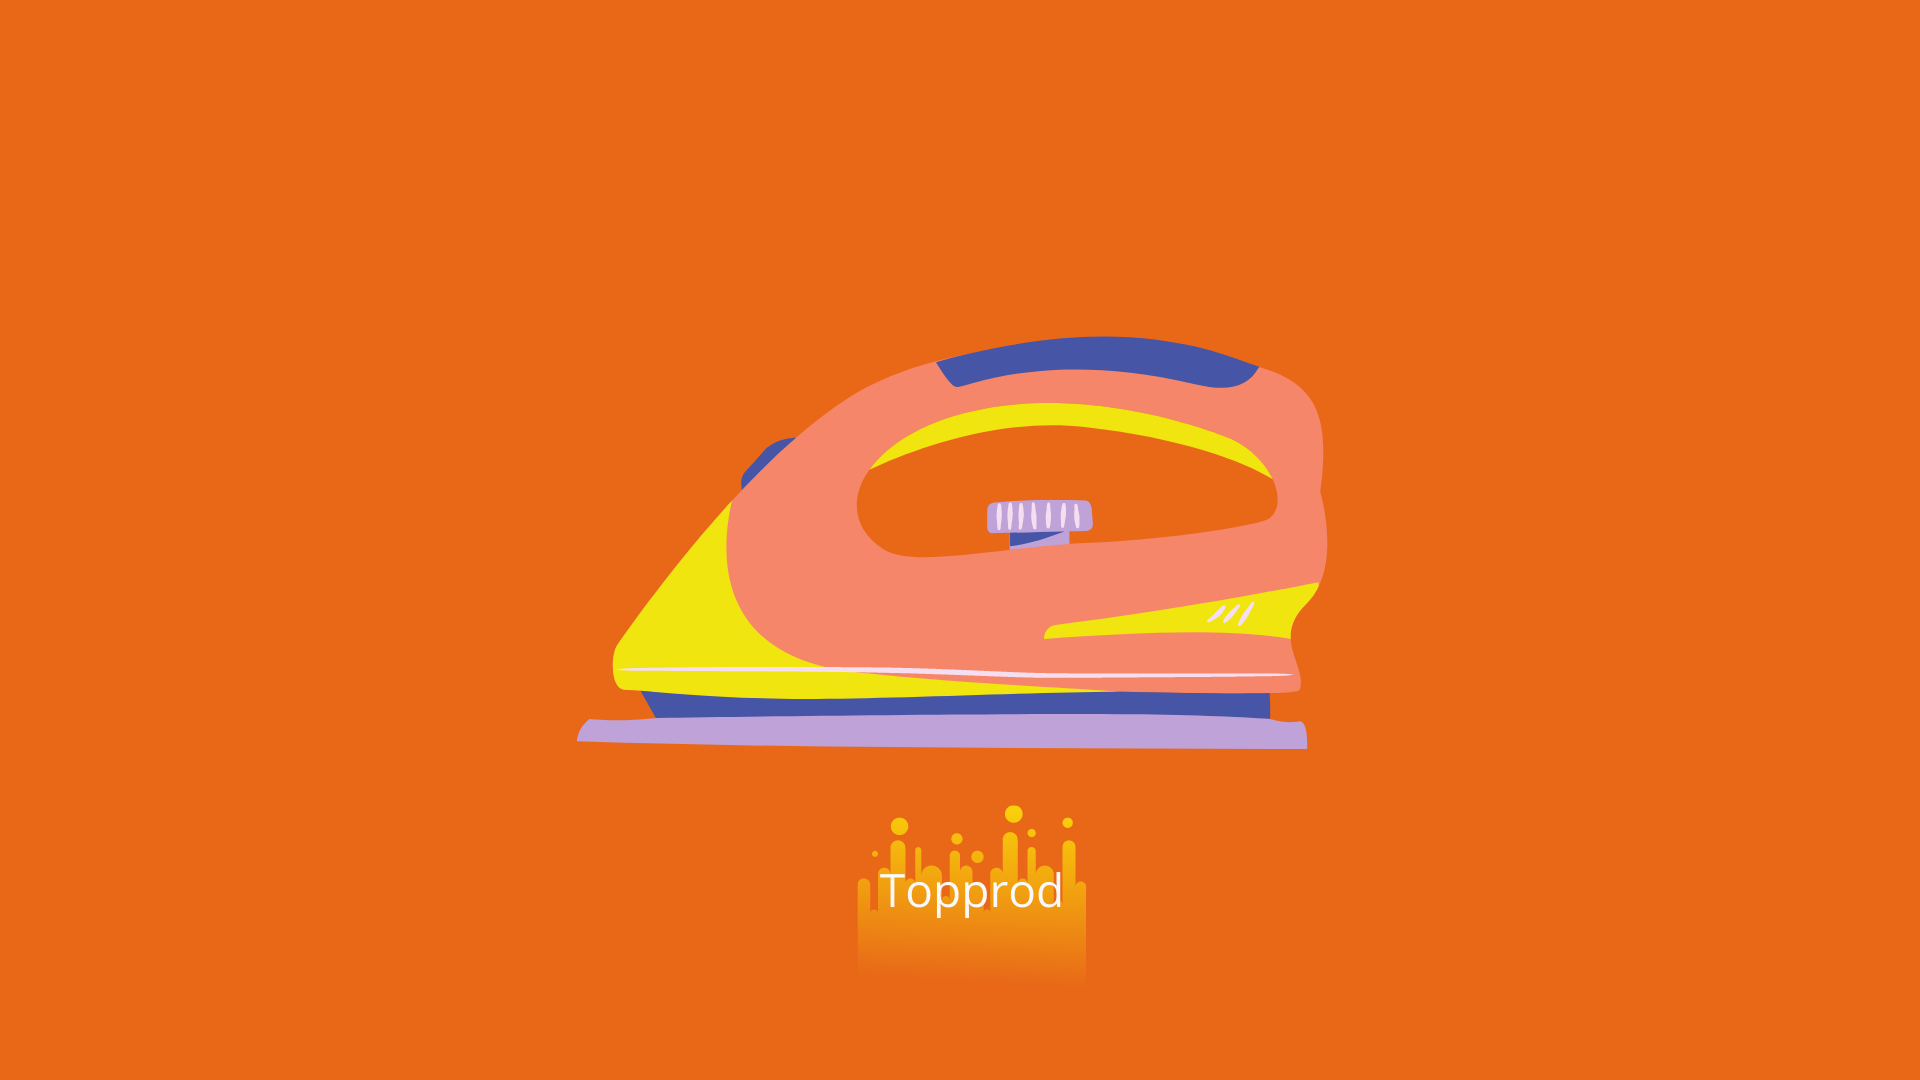 10 Best Dry Iron In India (2021): Reviews & Buyer's Guide